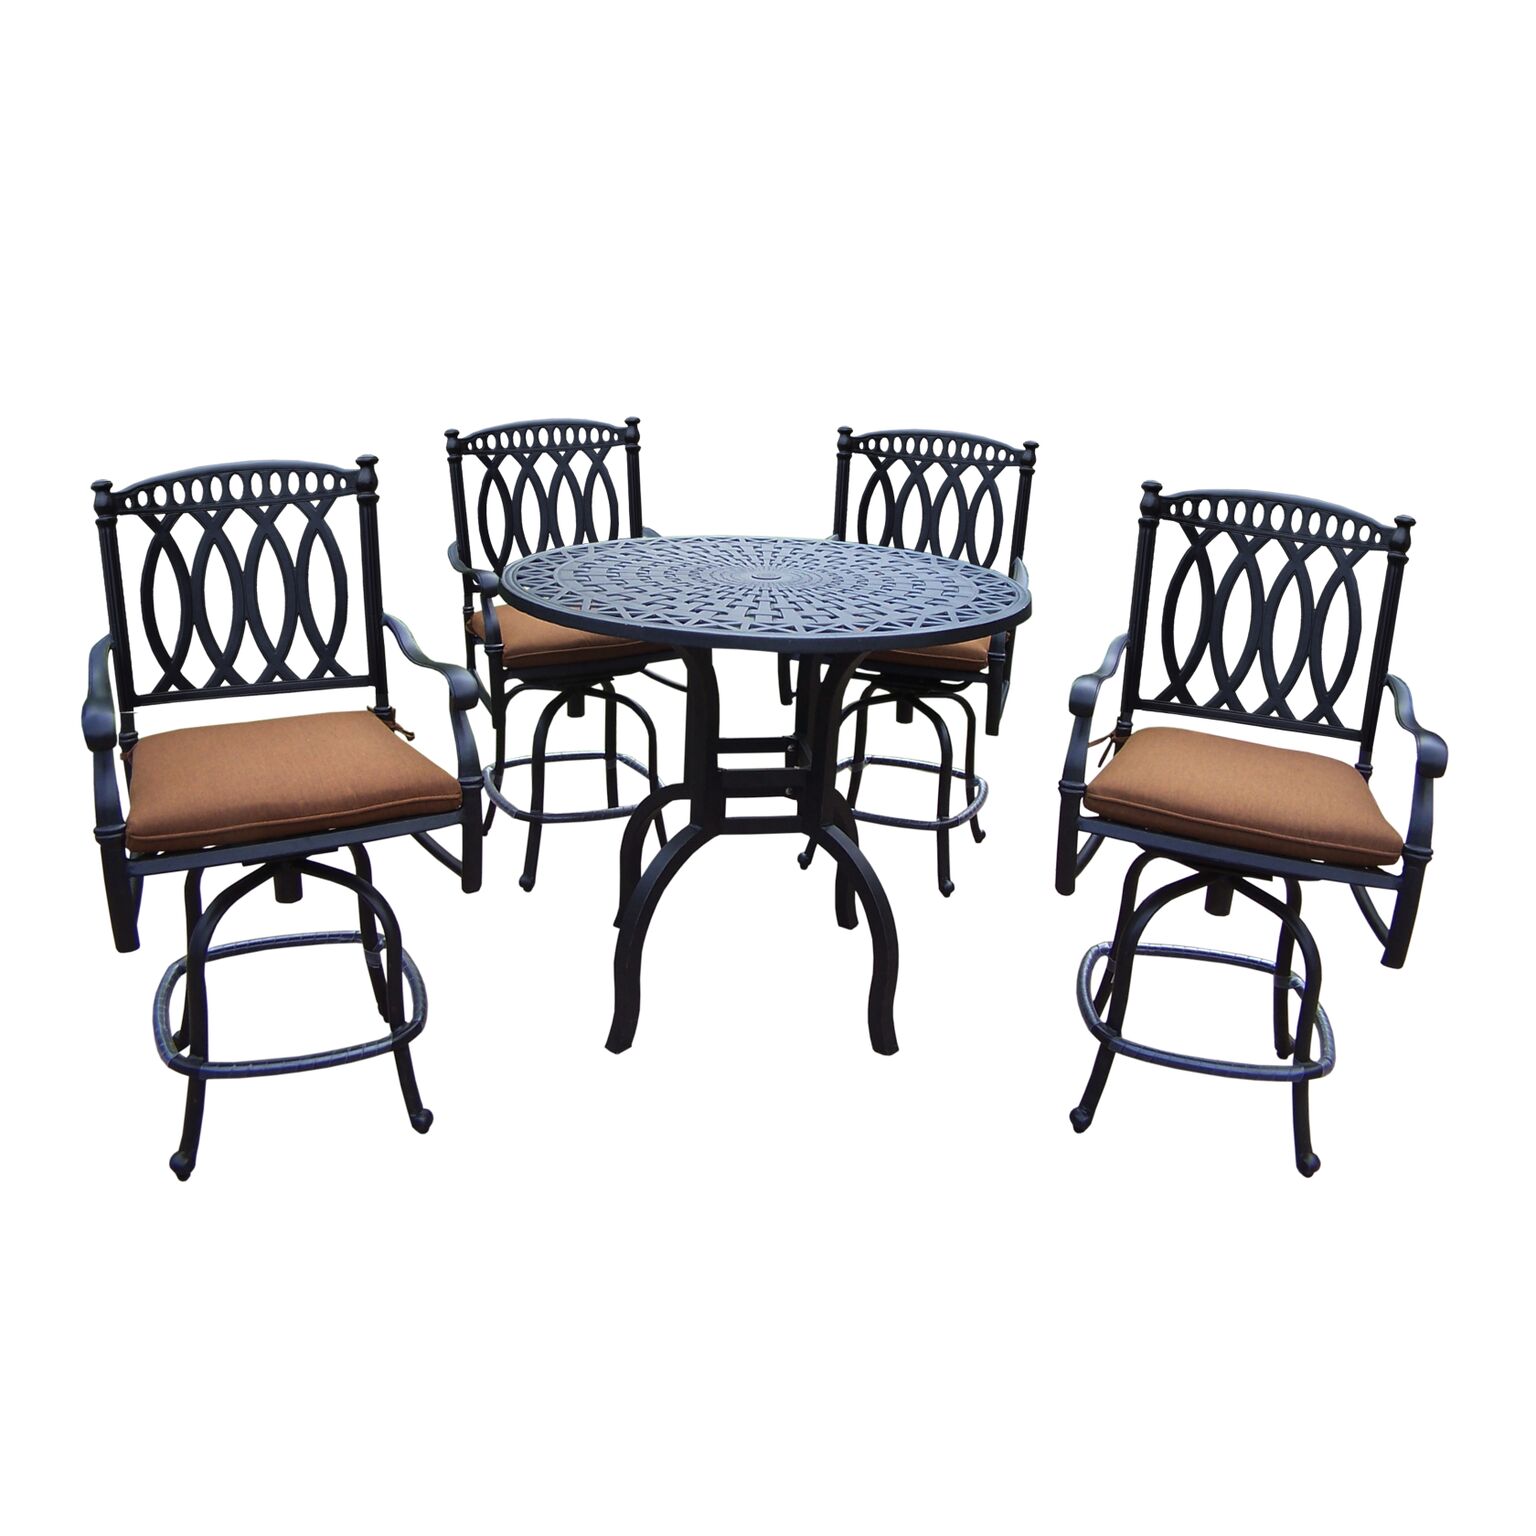 Outdoor Living and Style 5-Piece Charcoal Black Round Outdoor Patio Bar Set - Tan Brown Cushions - image 1 of 3